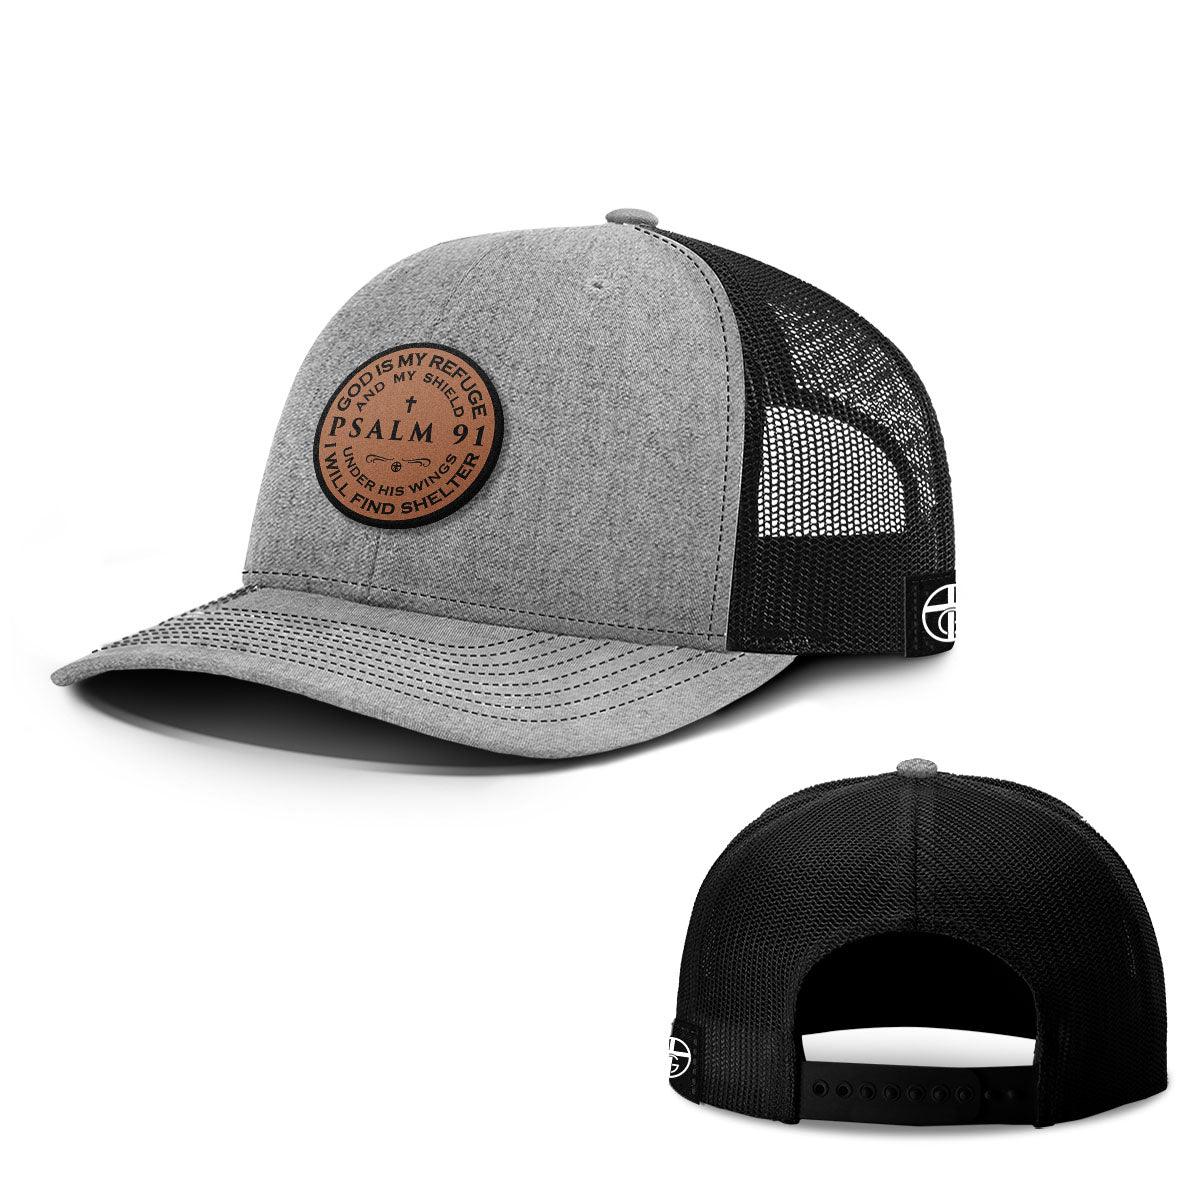 Psalm 91 Circle Leather Patch Hats - Our True God